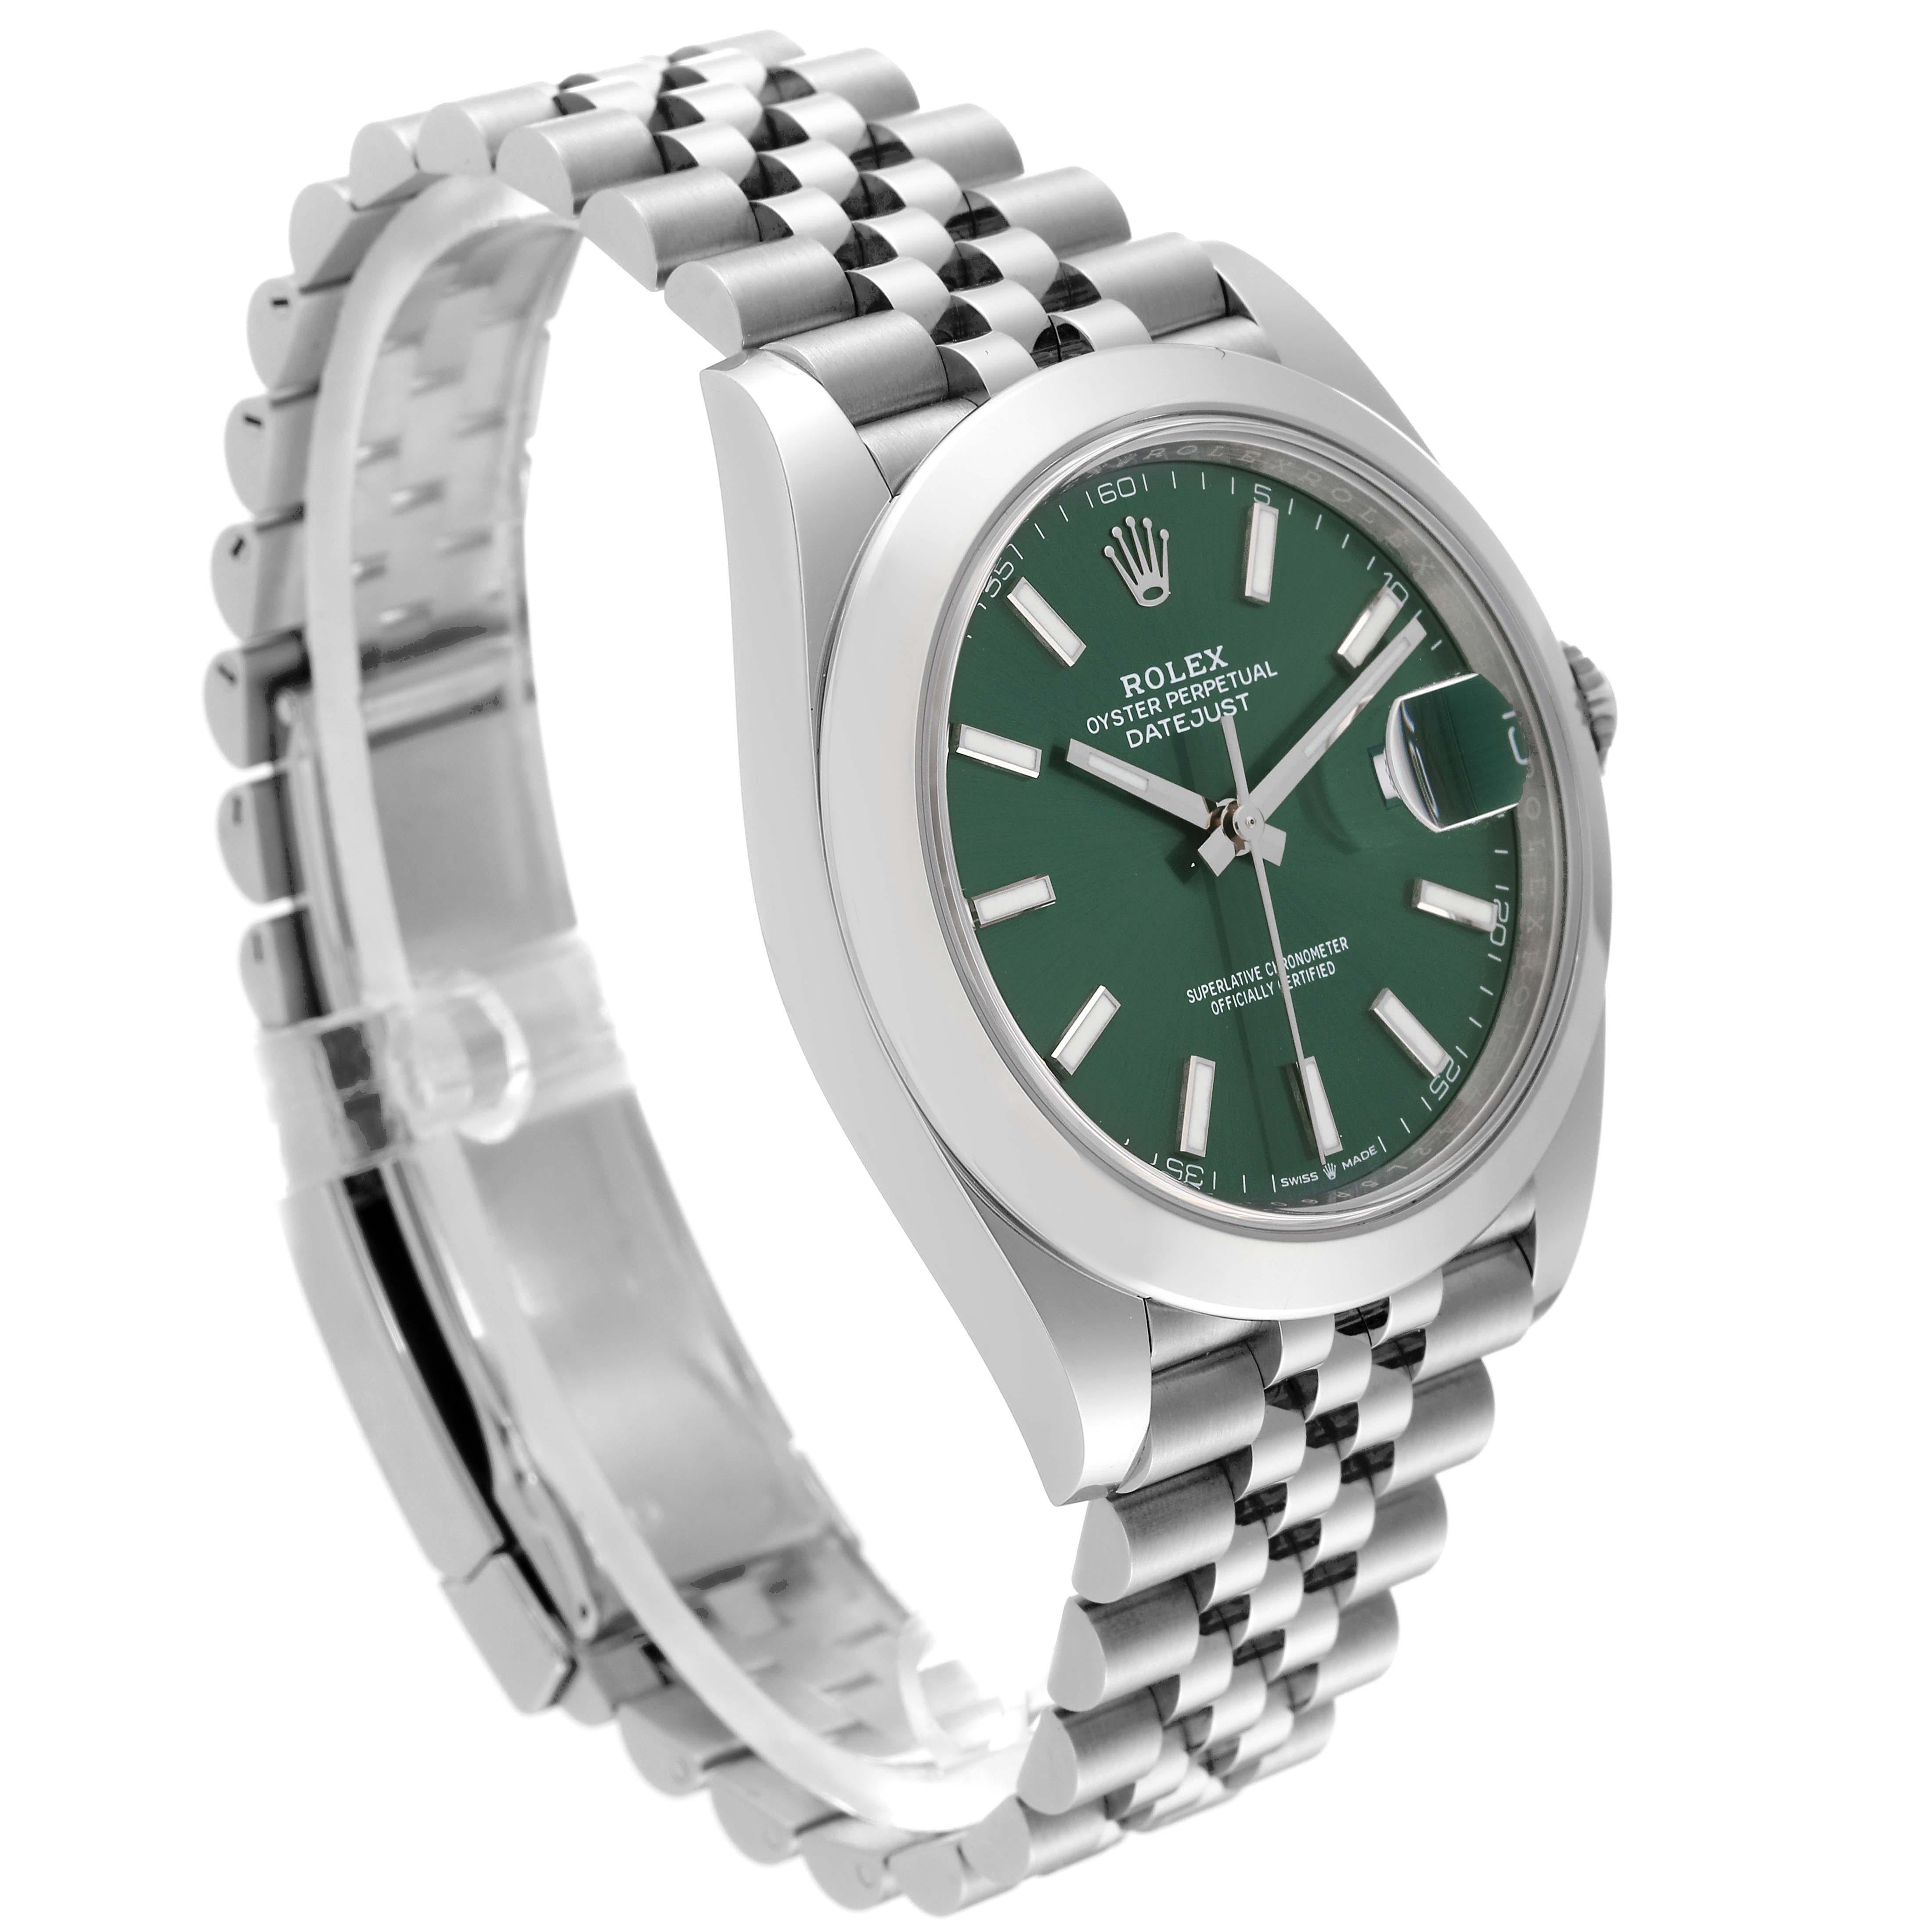 Rolex Datejust 41 Mint Green Dial Steel Mens Watch 126300 Unworn. Officially certified chronometer automatic self-winding movement. Stainless steel case 41 mm in diameter. Rolex logo on the crown. Stainless steel smooth bezel. Scratch resistant